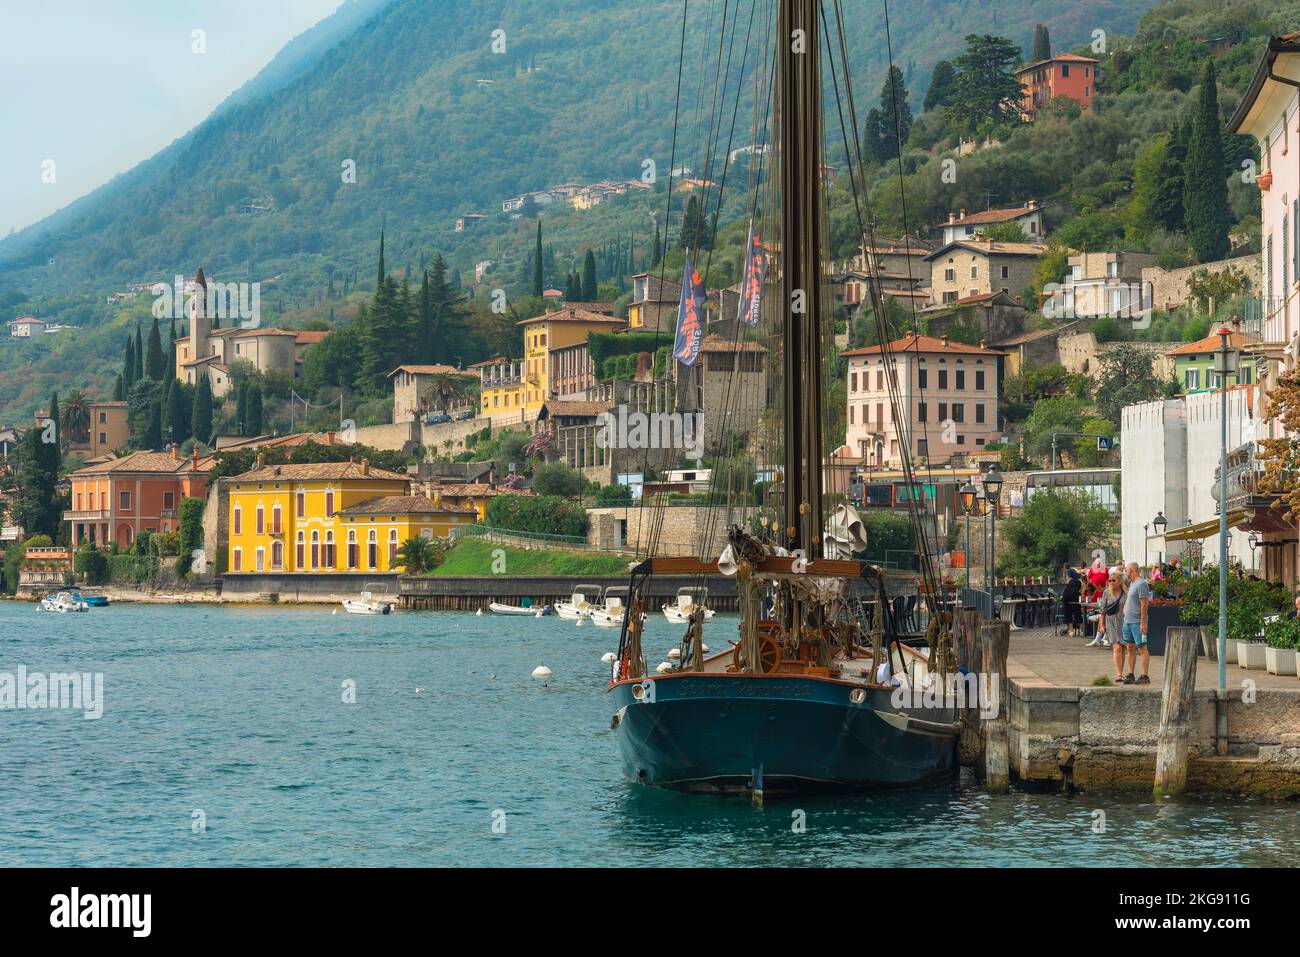 Gargnano Italy, view in summer of the waterfront area in the scenic lakeside town of Gargnano in Lake Garda, Lombardy, Italy Stock Photo